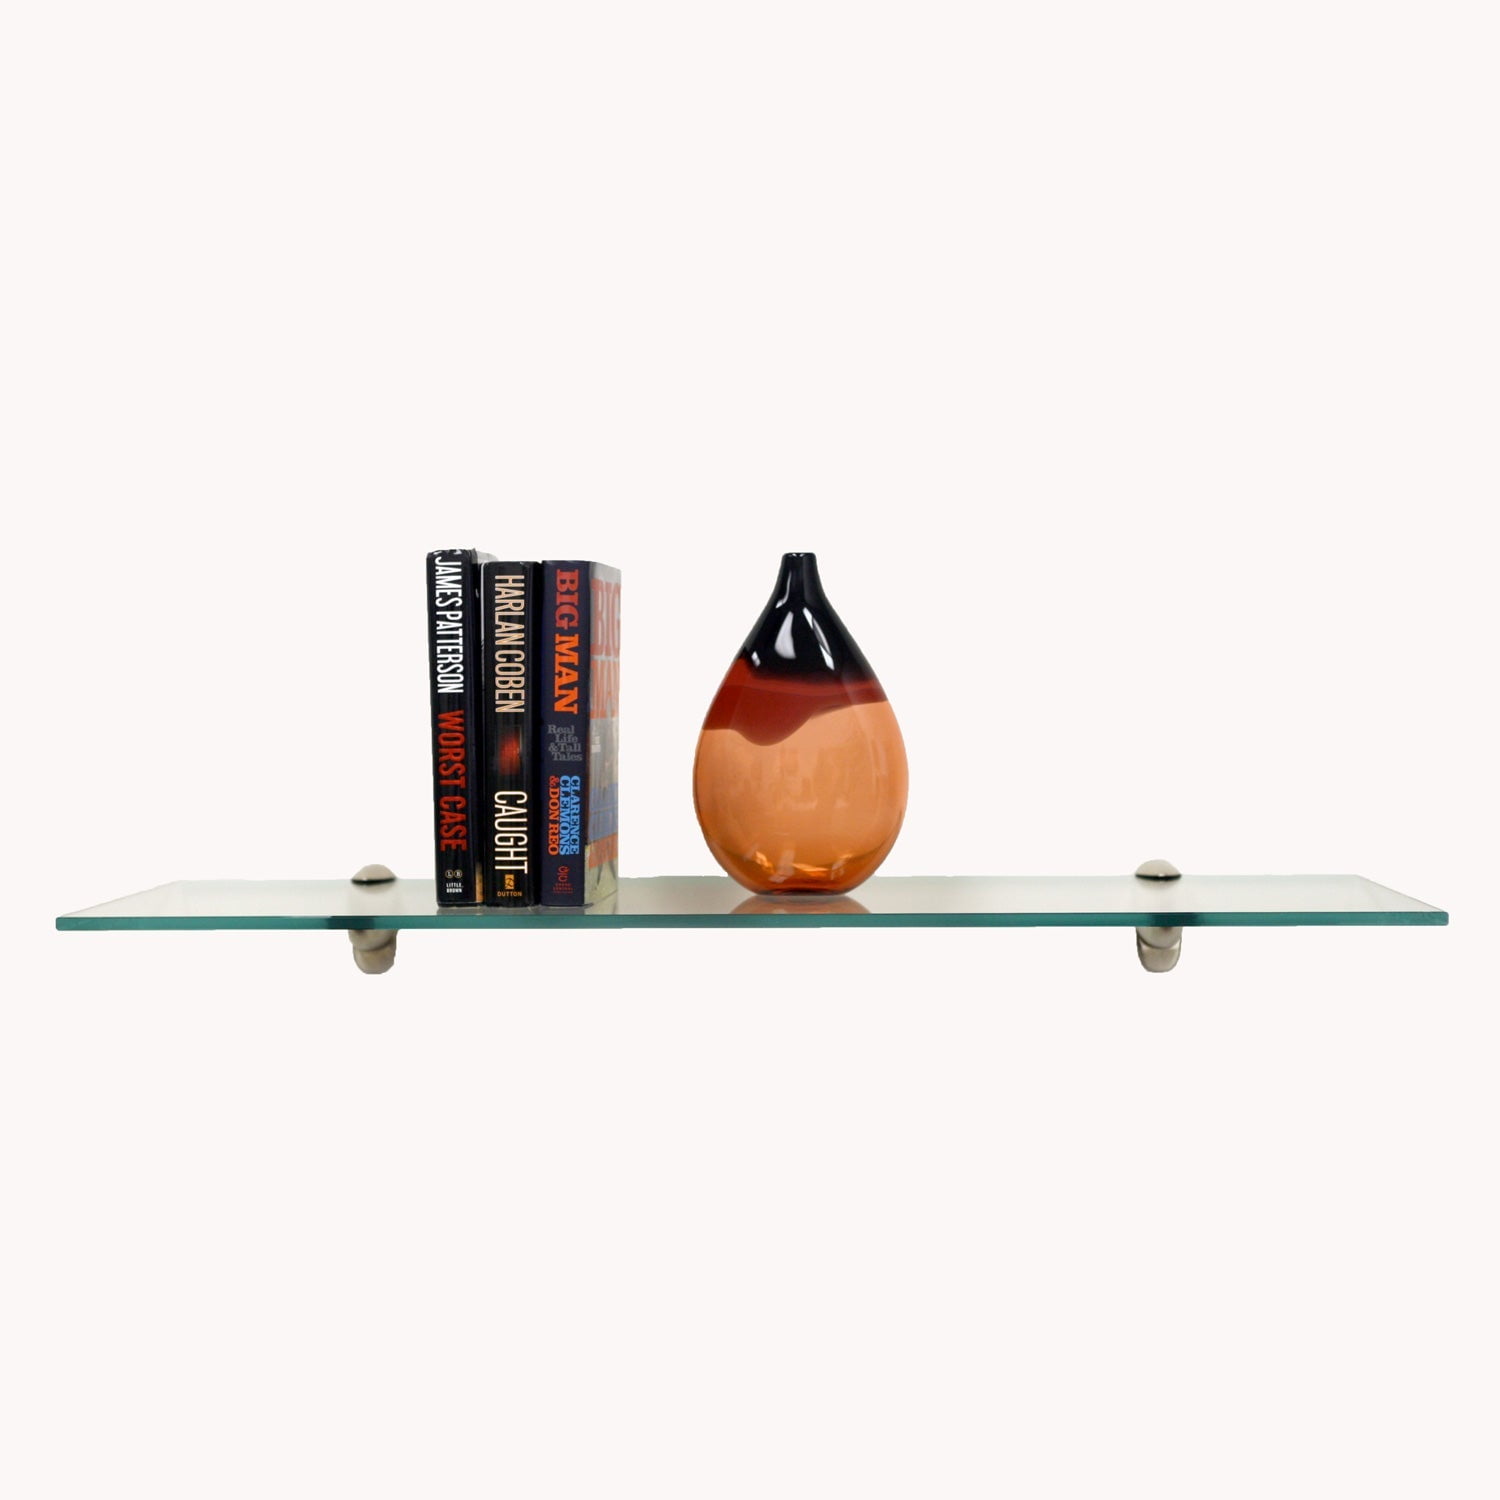 12" X 42" Heron Floating Glass Shelves Brackets Included with Each Shelf  By Spancraft Glass